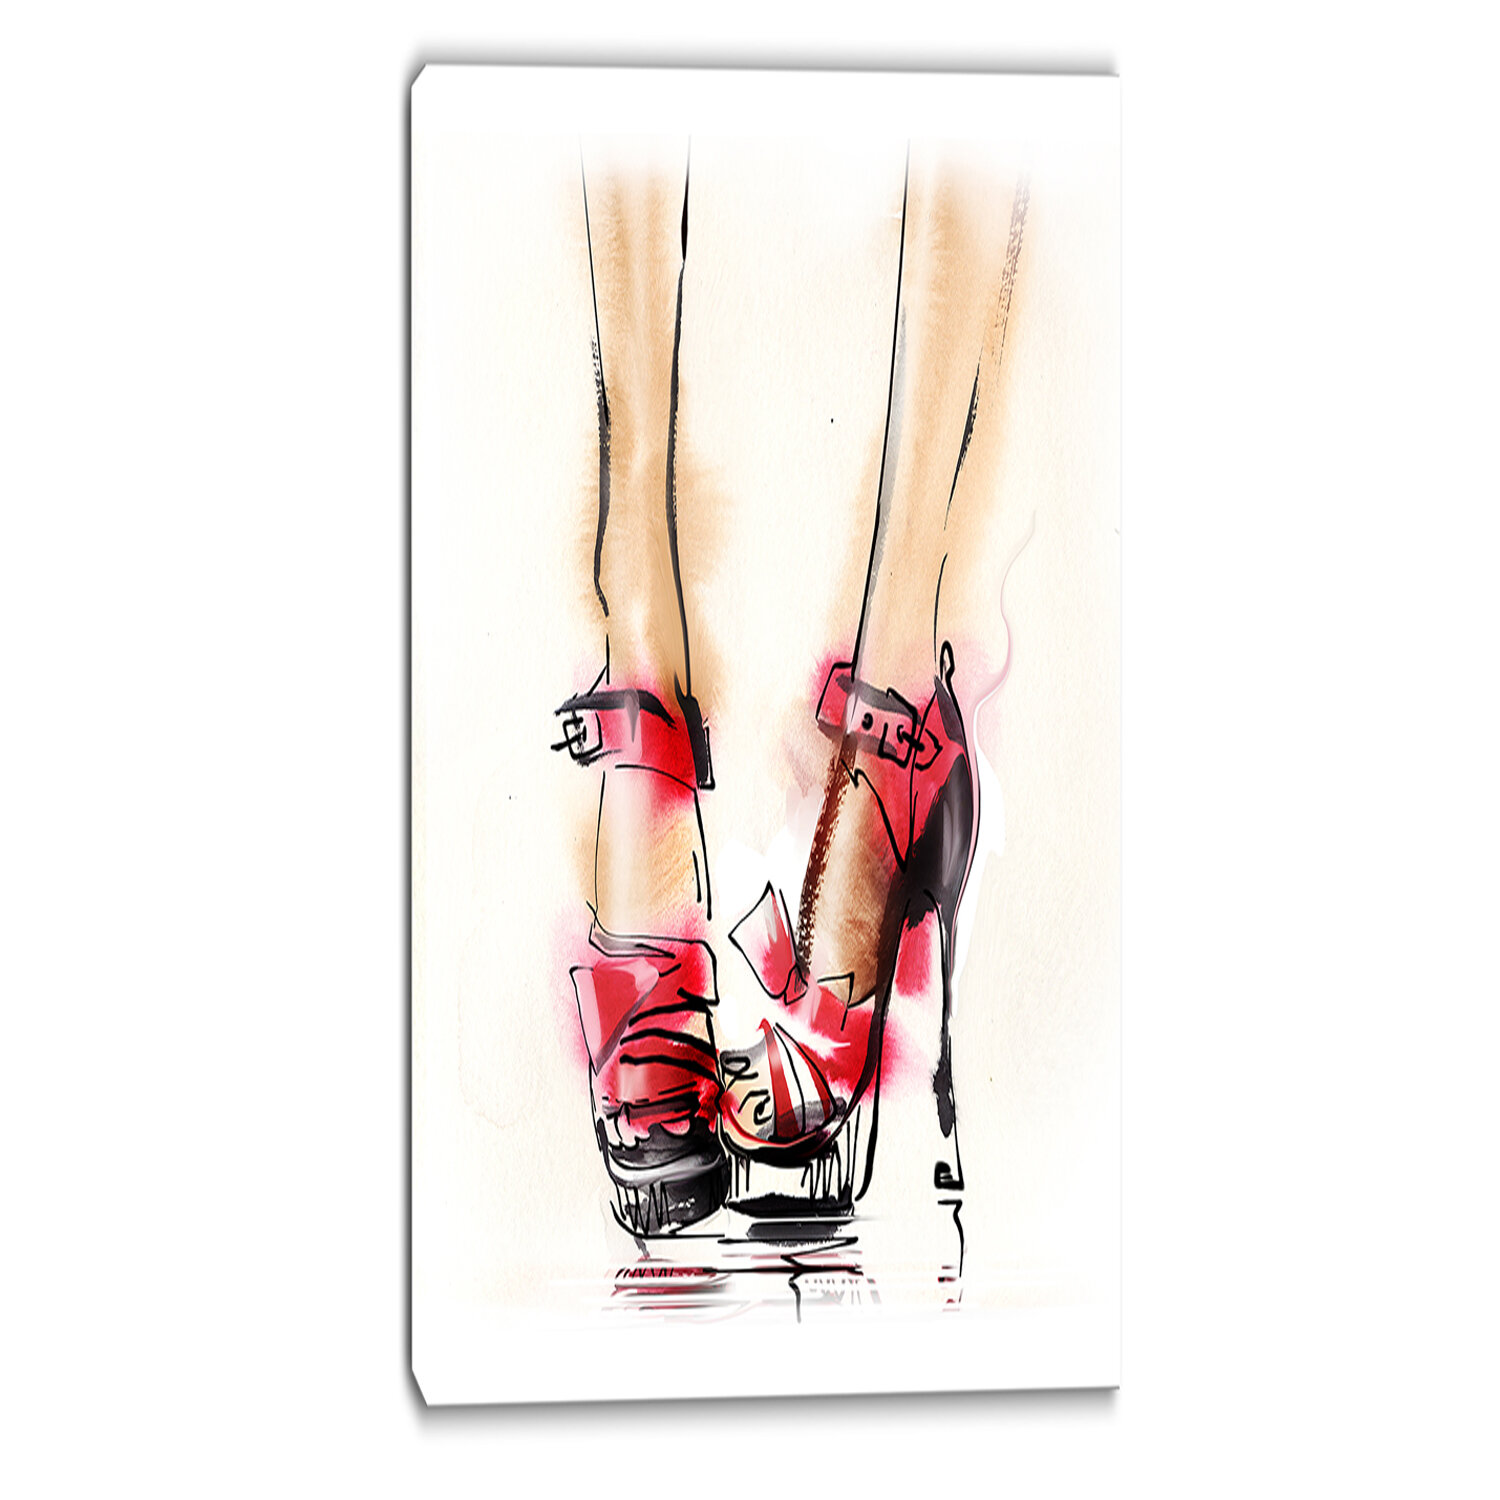 High Heeled Shoes Drawings for Sale (Page #2 of 5) - Fine Art America